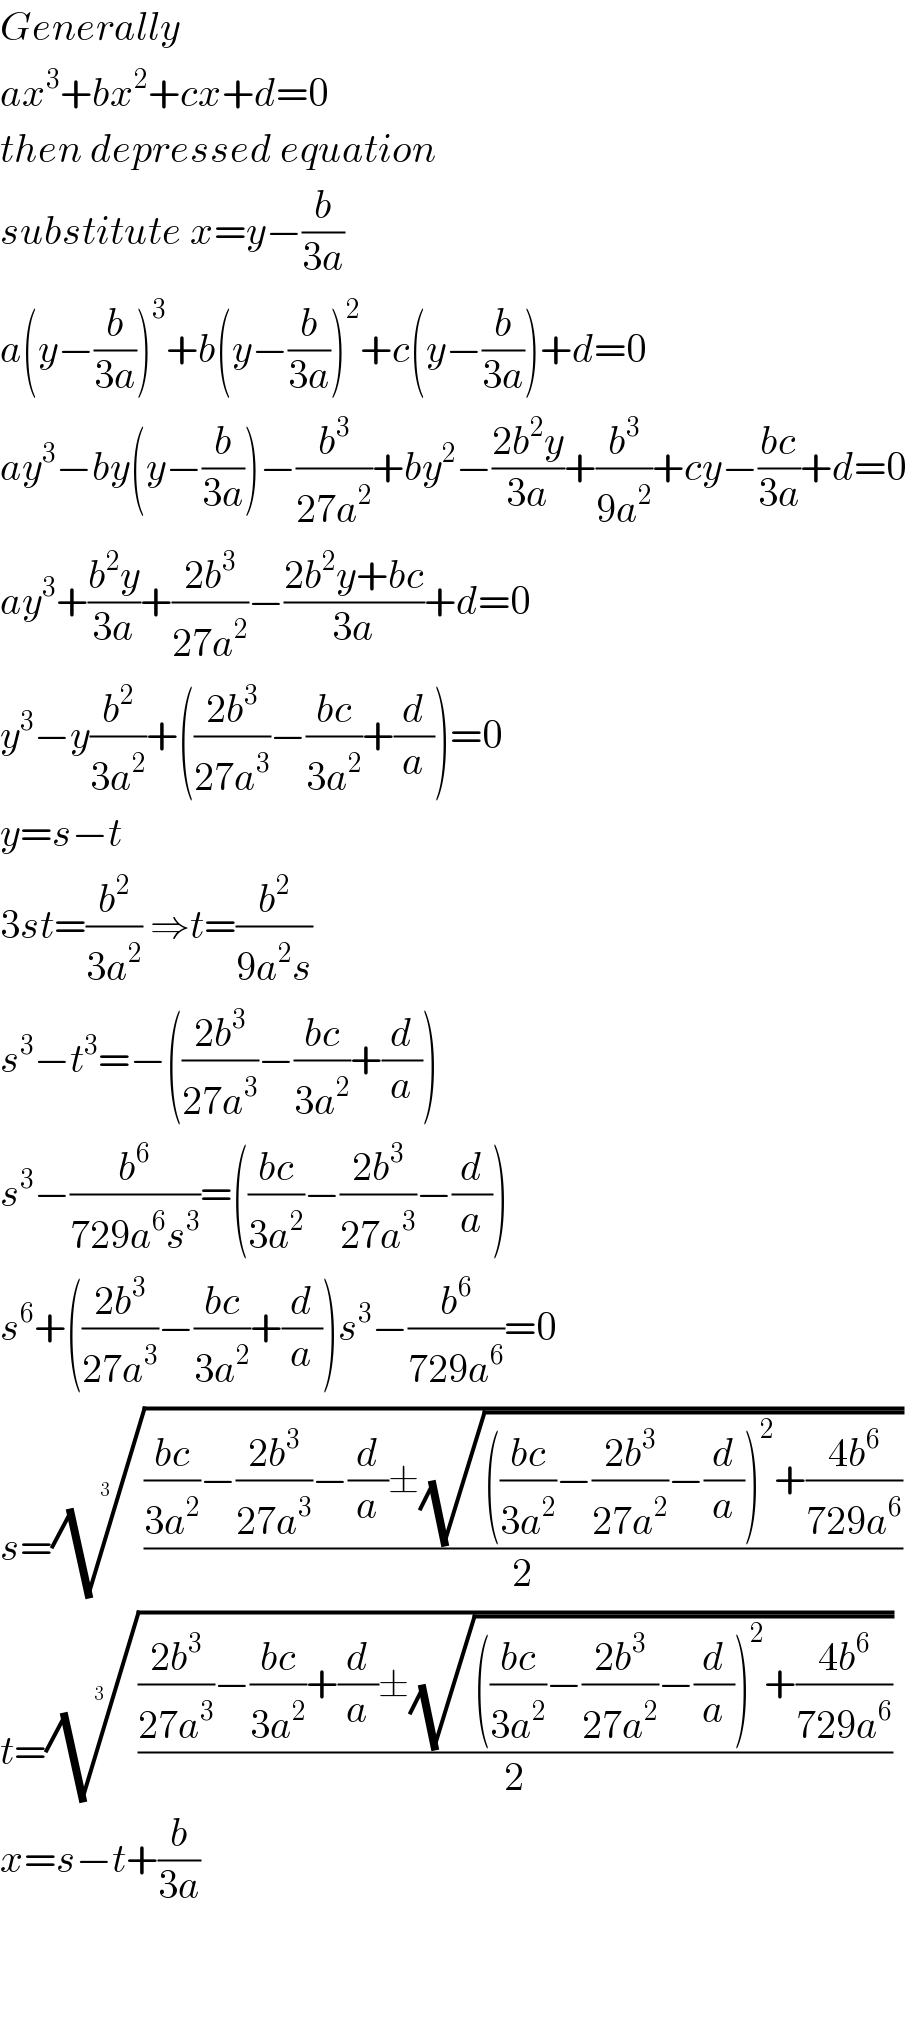 Generally  ax^3 +bx^2 +cx+d=0  then depressed equation  substitute x=y−(b/(3a))  a(y−(b/(3a)))^3 +b(y−(b/(3a)))^2 +c(y−(b/(3a)))+d=0  ay^3 −by(y−(b/(3a)))−(b^3 /(27a^2 ))+by^2 −((2b^2 y)/(3a))+(b^3 /(9a^2 ))+cy−((bc)/(3a))+d=0  ay^3 +((b^2 y)/(3a))+((2b^3 )/(27a^2 ))−((2b^2 y+bc)/(3a))+d=0  y^3 −y(b^2 /(3a^2 ))+(((2b^3 )/(27a^3 ))−((bc)/(3a^2 ))+(d/a))=0  y=s−t    3st=(b^2 /(3a^2 )) ⇒t=(b^2 /(9a^2 s))  s^3 −t^3 =−(((2b^3 )/(27a^3 ))−((bc)/(3a^2 ))+(d/a))  s^3 −(b^6 /(729a^6 s^3 ))=(((bc)/(3a^2 ))−((2b^3 )/(27a^3 ))−(d/a))  s^6 +(((2b^3 )/(27a^3 ))−((bc)/(3a^2 ))+(d/a))s^3 −(b^6 /(729a^6 ))=0  s=(((((bc)/(3a^2 ))−((2b^3 )/(27a^3 ))−(d/a)±(√((((bc)/(3a^2 ))−((2b^3 )/(27a^2 ))−(d/a))^2 +((4b^6 )/(729a^6 )))))/2))^(1/3)   t=(((((2b^3 )/(27a^3 ))−((bc)/(3a^2 ))+(d/a)±(√((((bc)/(3a^2 ))−((2b^3 )/(27a^2 ))−(d/a))^2 +((4b^6 )/(729a^6 )))))/2))^(1/3)   x=s−t+(b/(3a))      